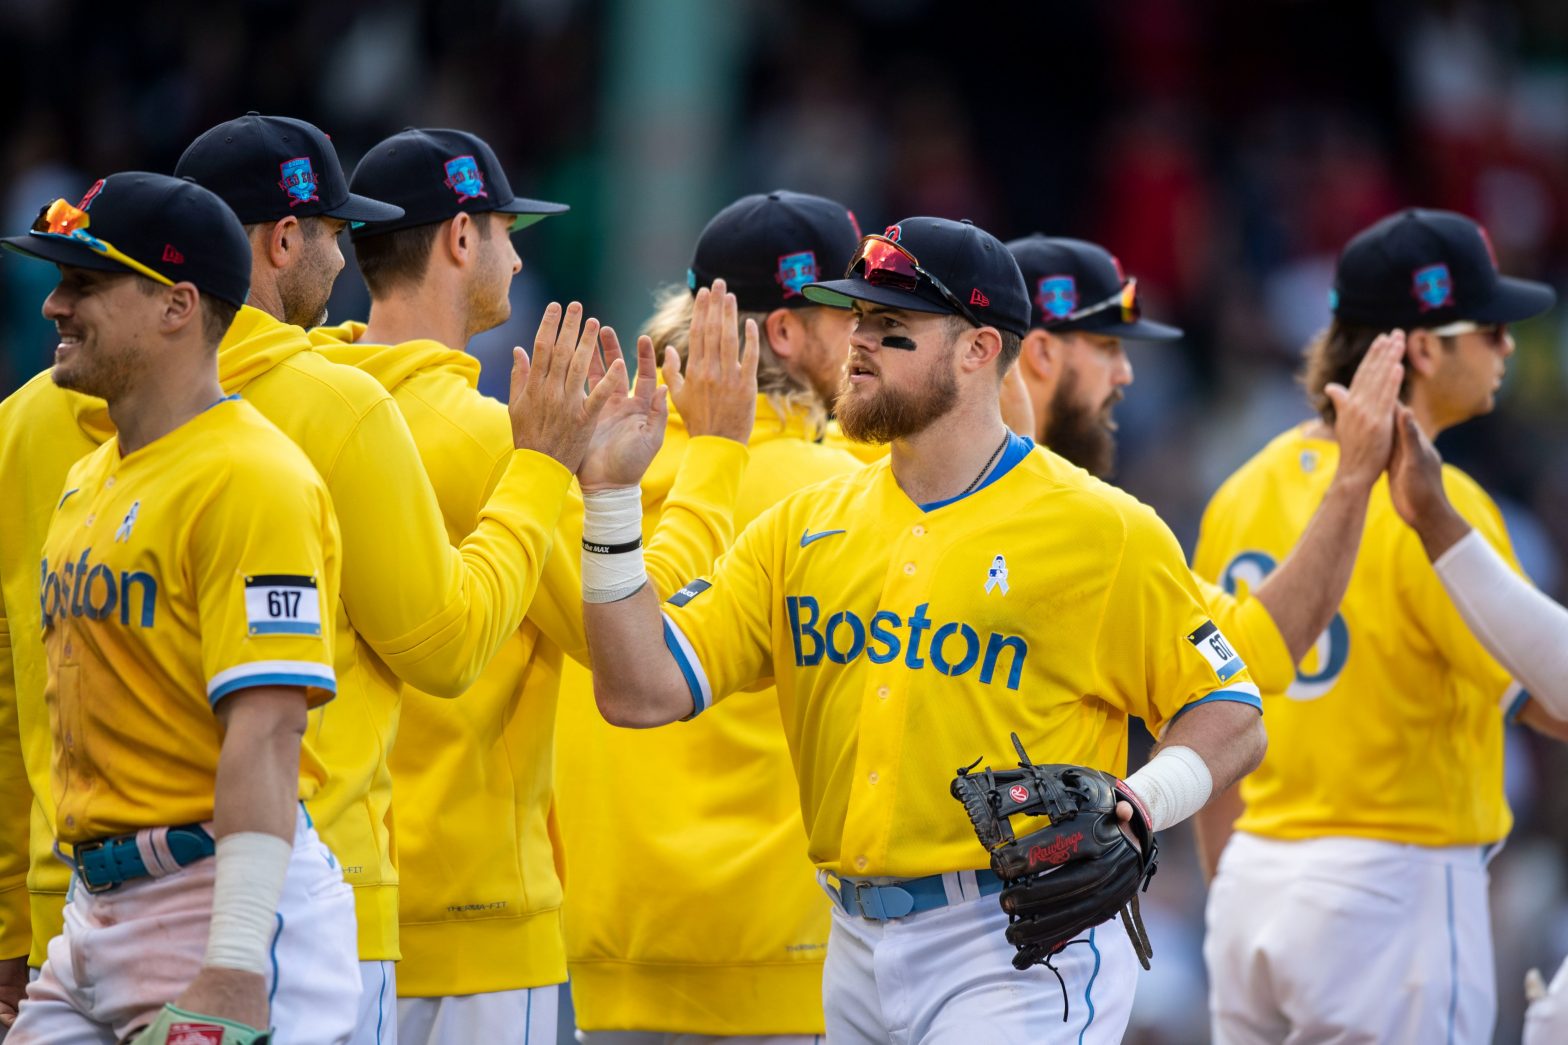 Why did the Red Sox wear yellow and blue against New York Yankees instead of iconic red and navy?